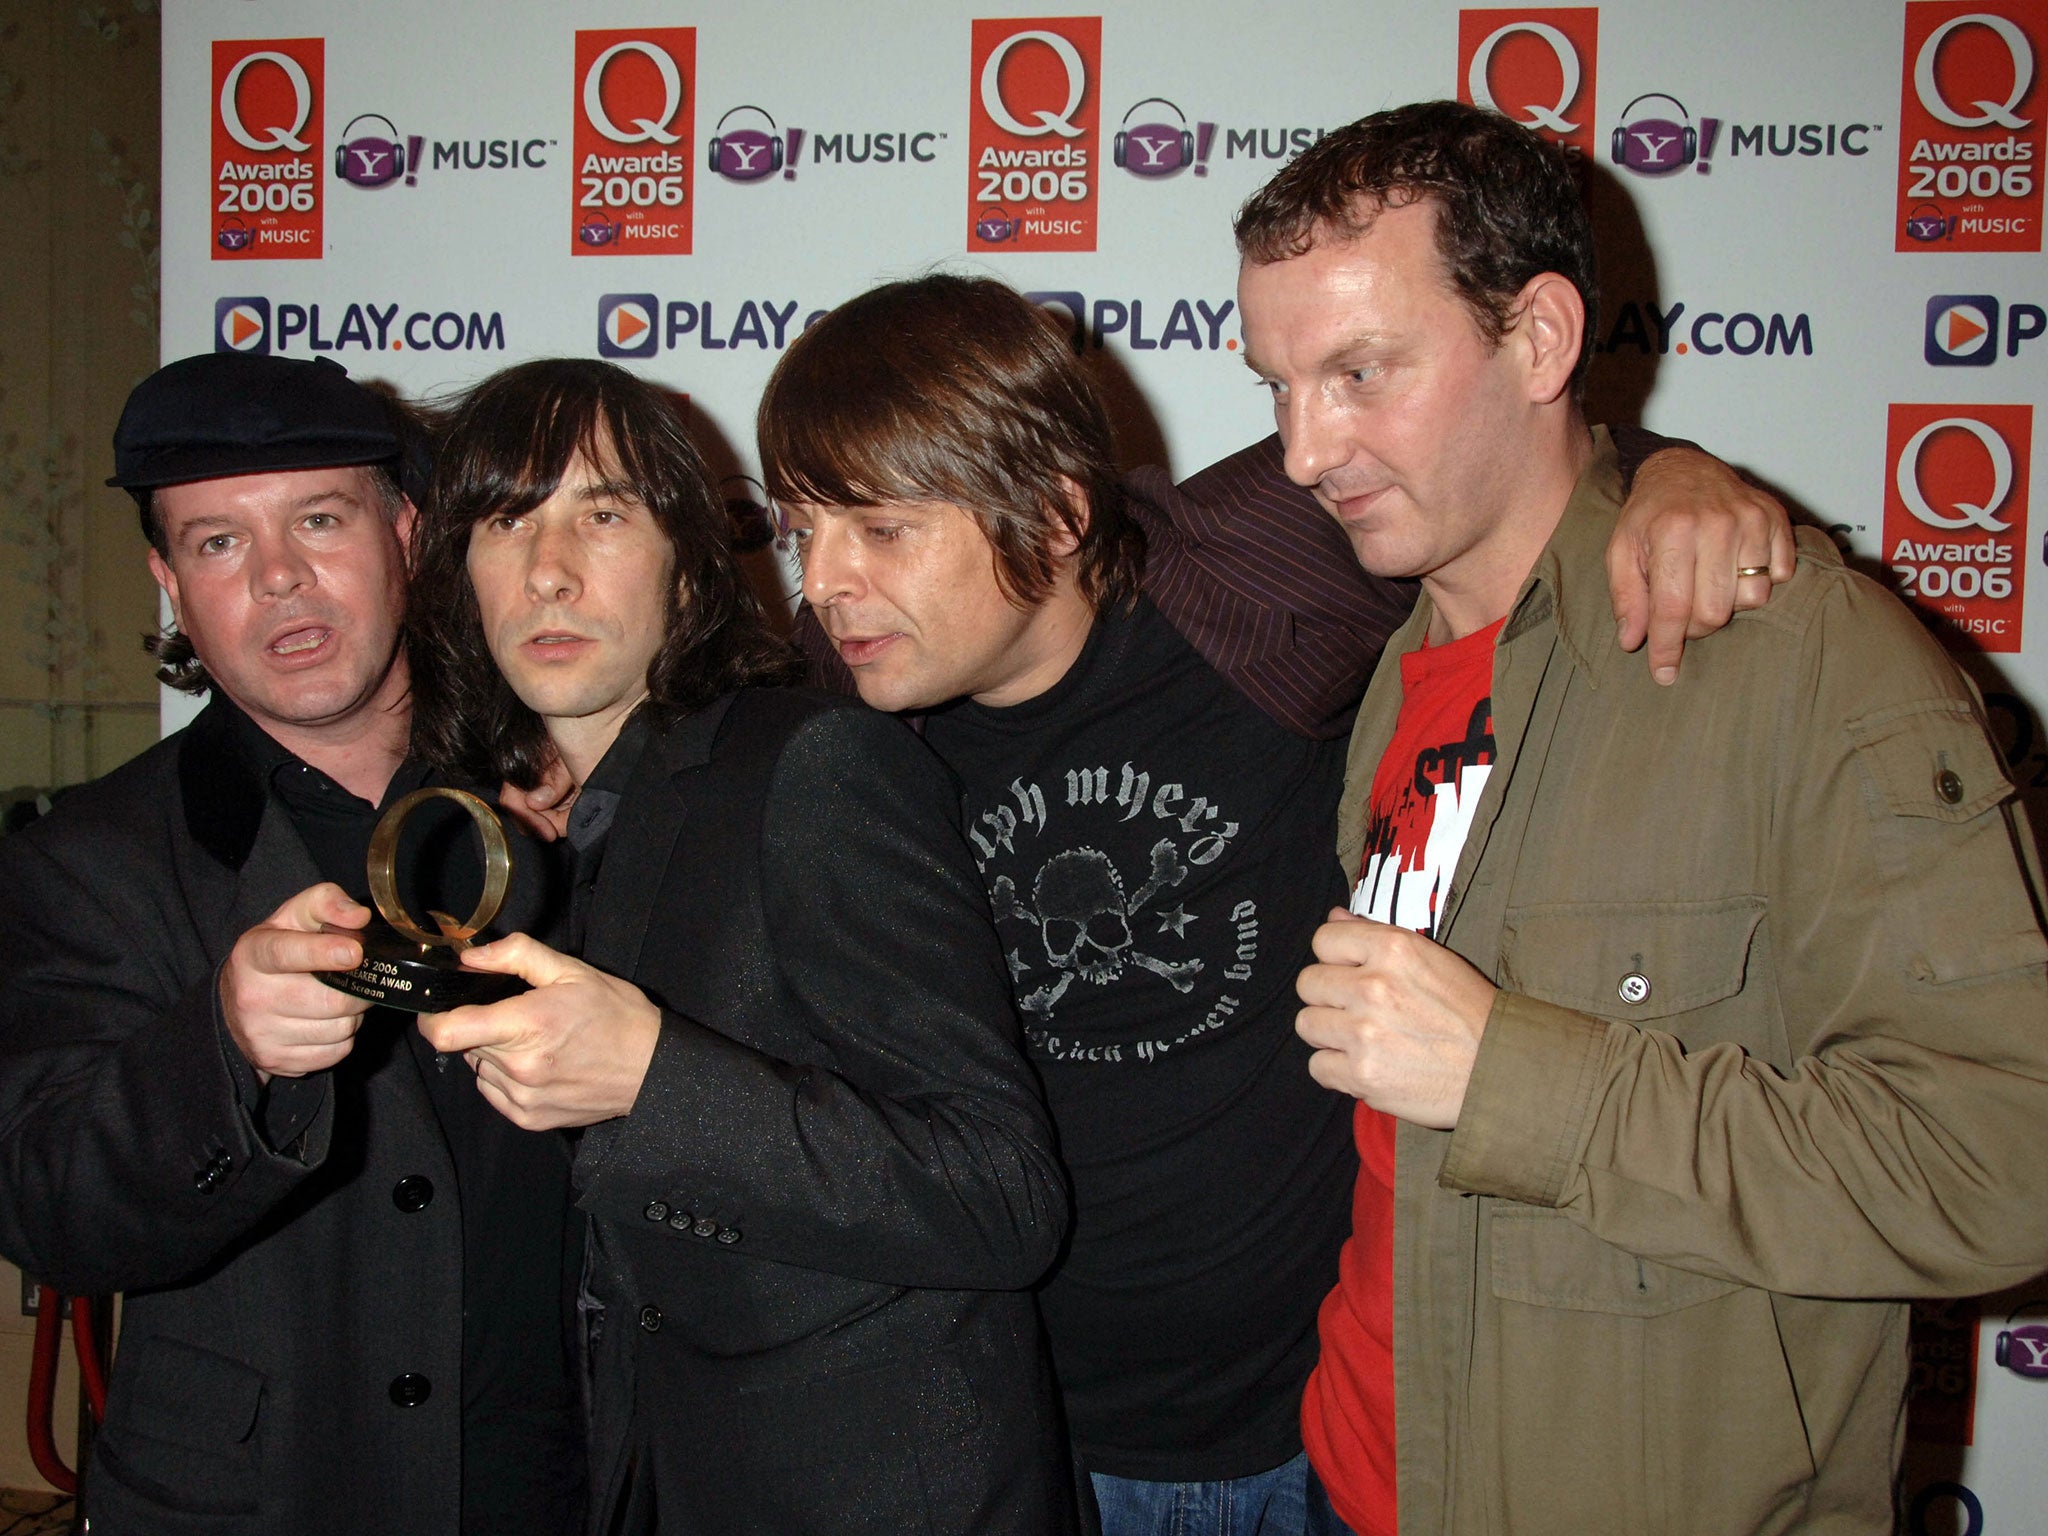 Robert Young, pictured to the far left, with the rest of Primal Scream